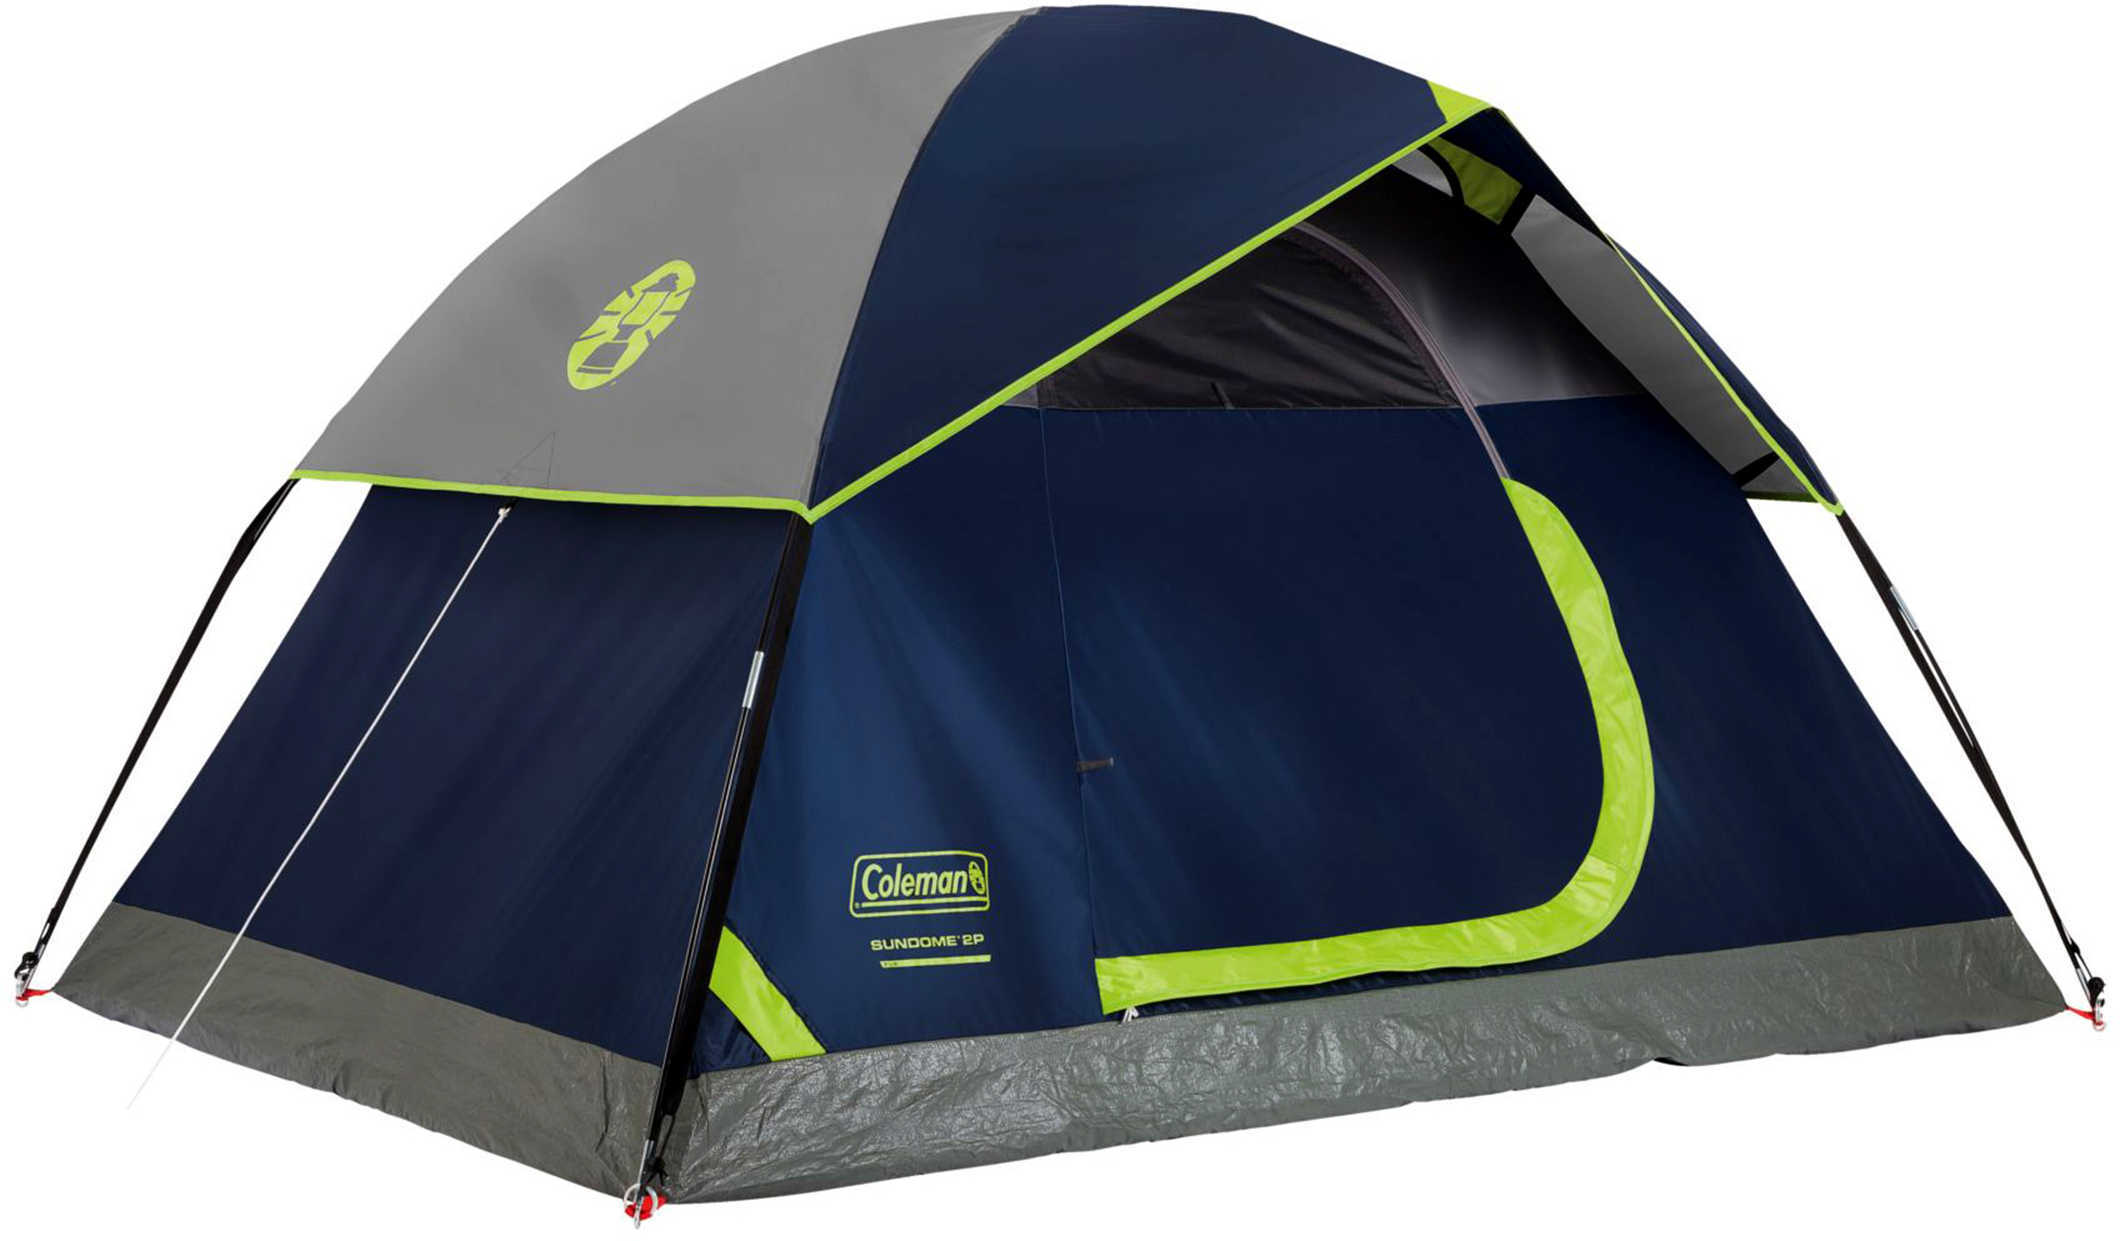 Coleman Sundome Tent 4 Person, 9' x 7', Navy/Gray Md: 2000024582